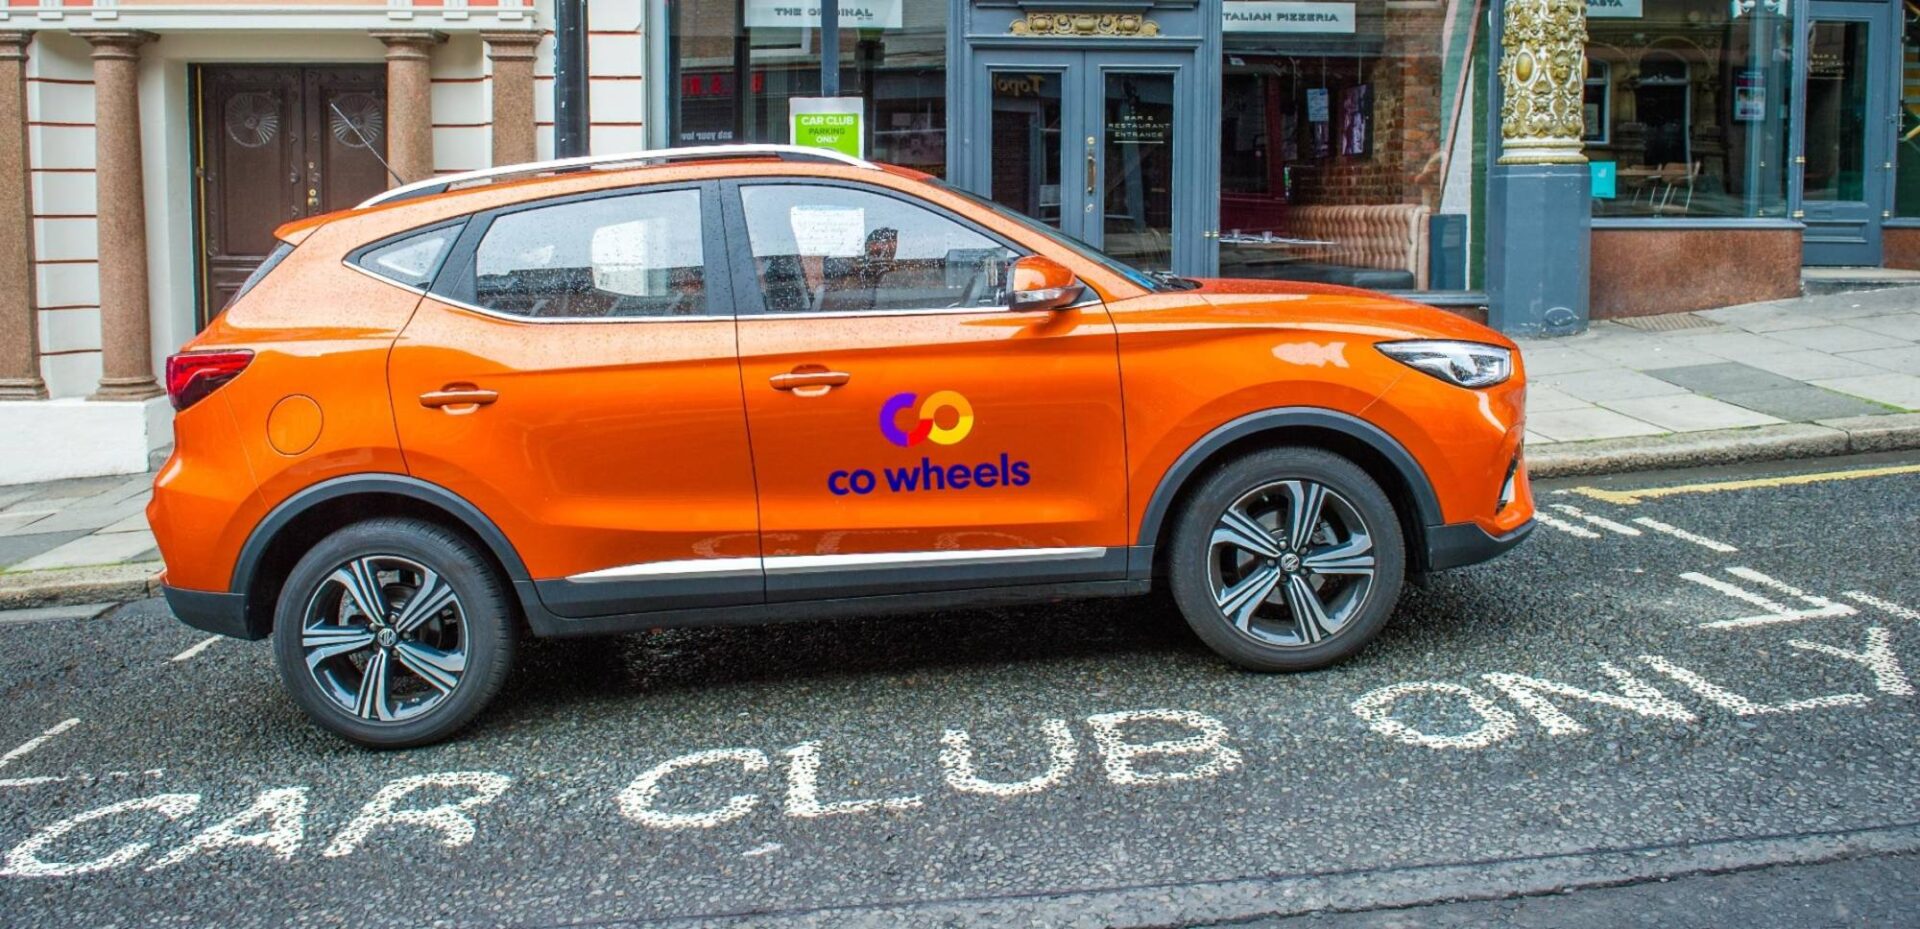 Co Wheels car parked in car club only space long street